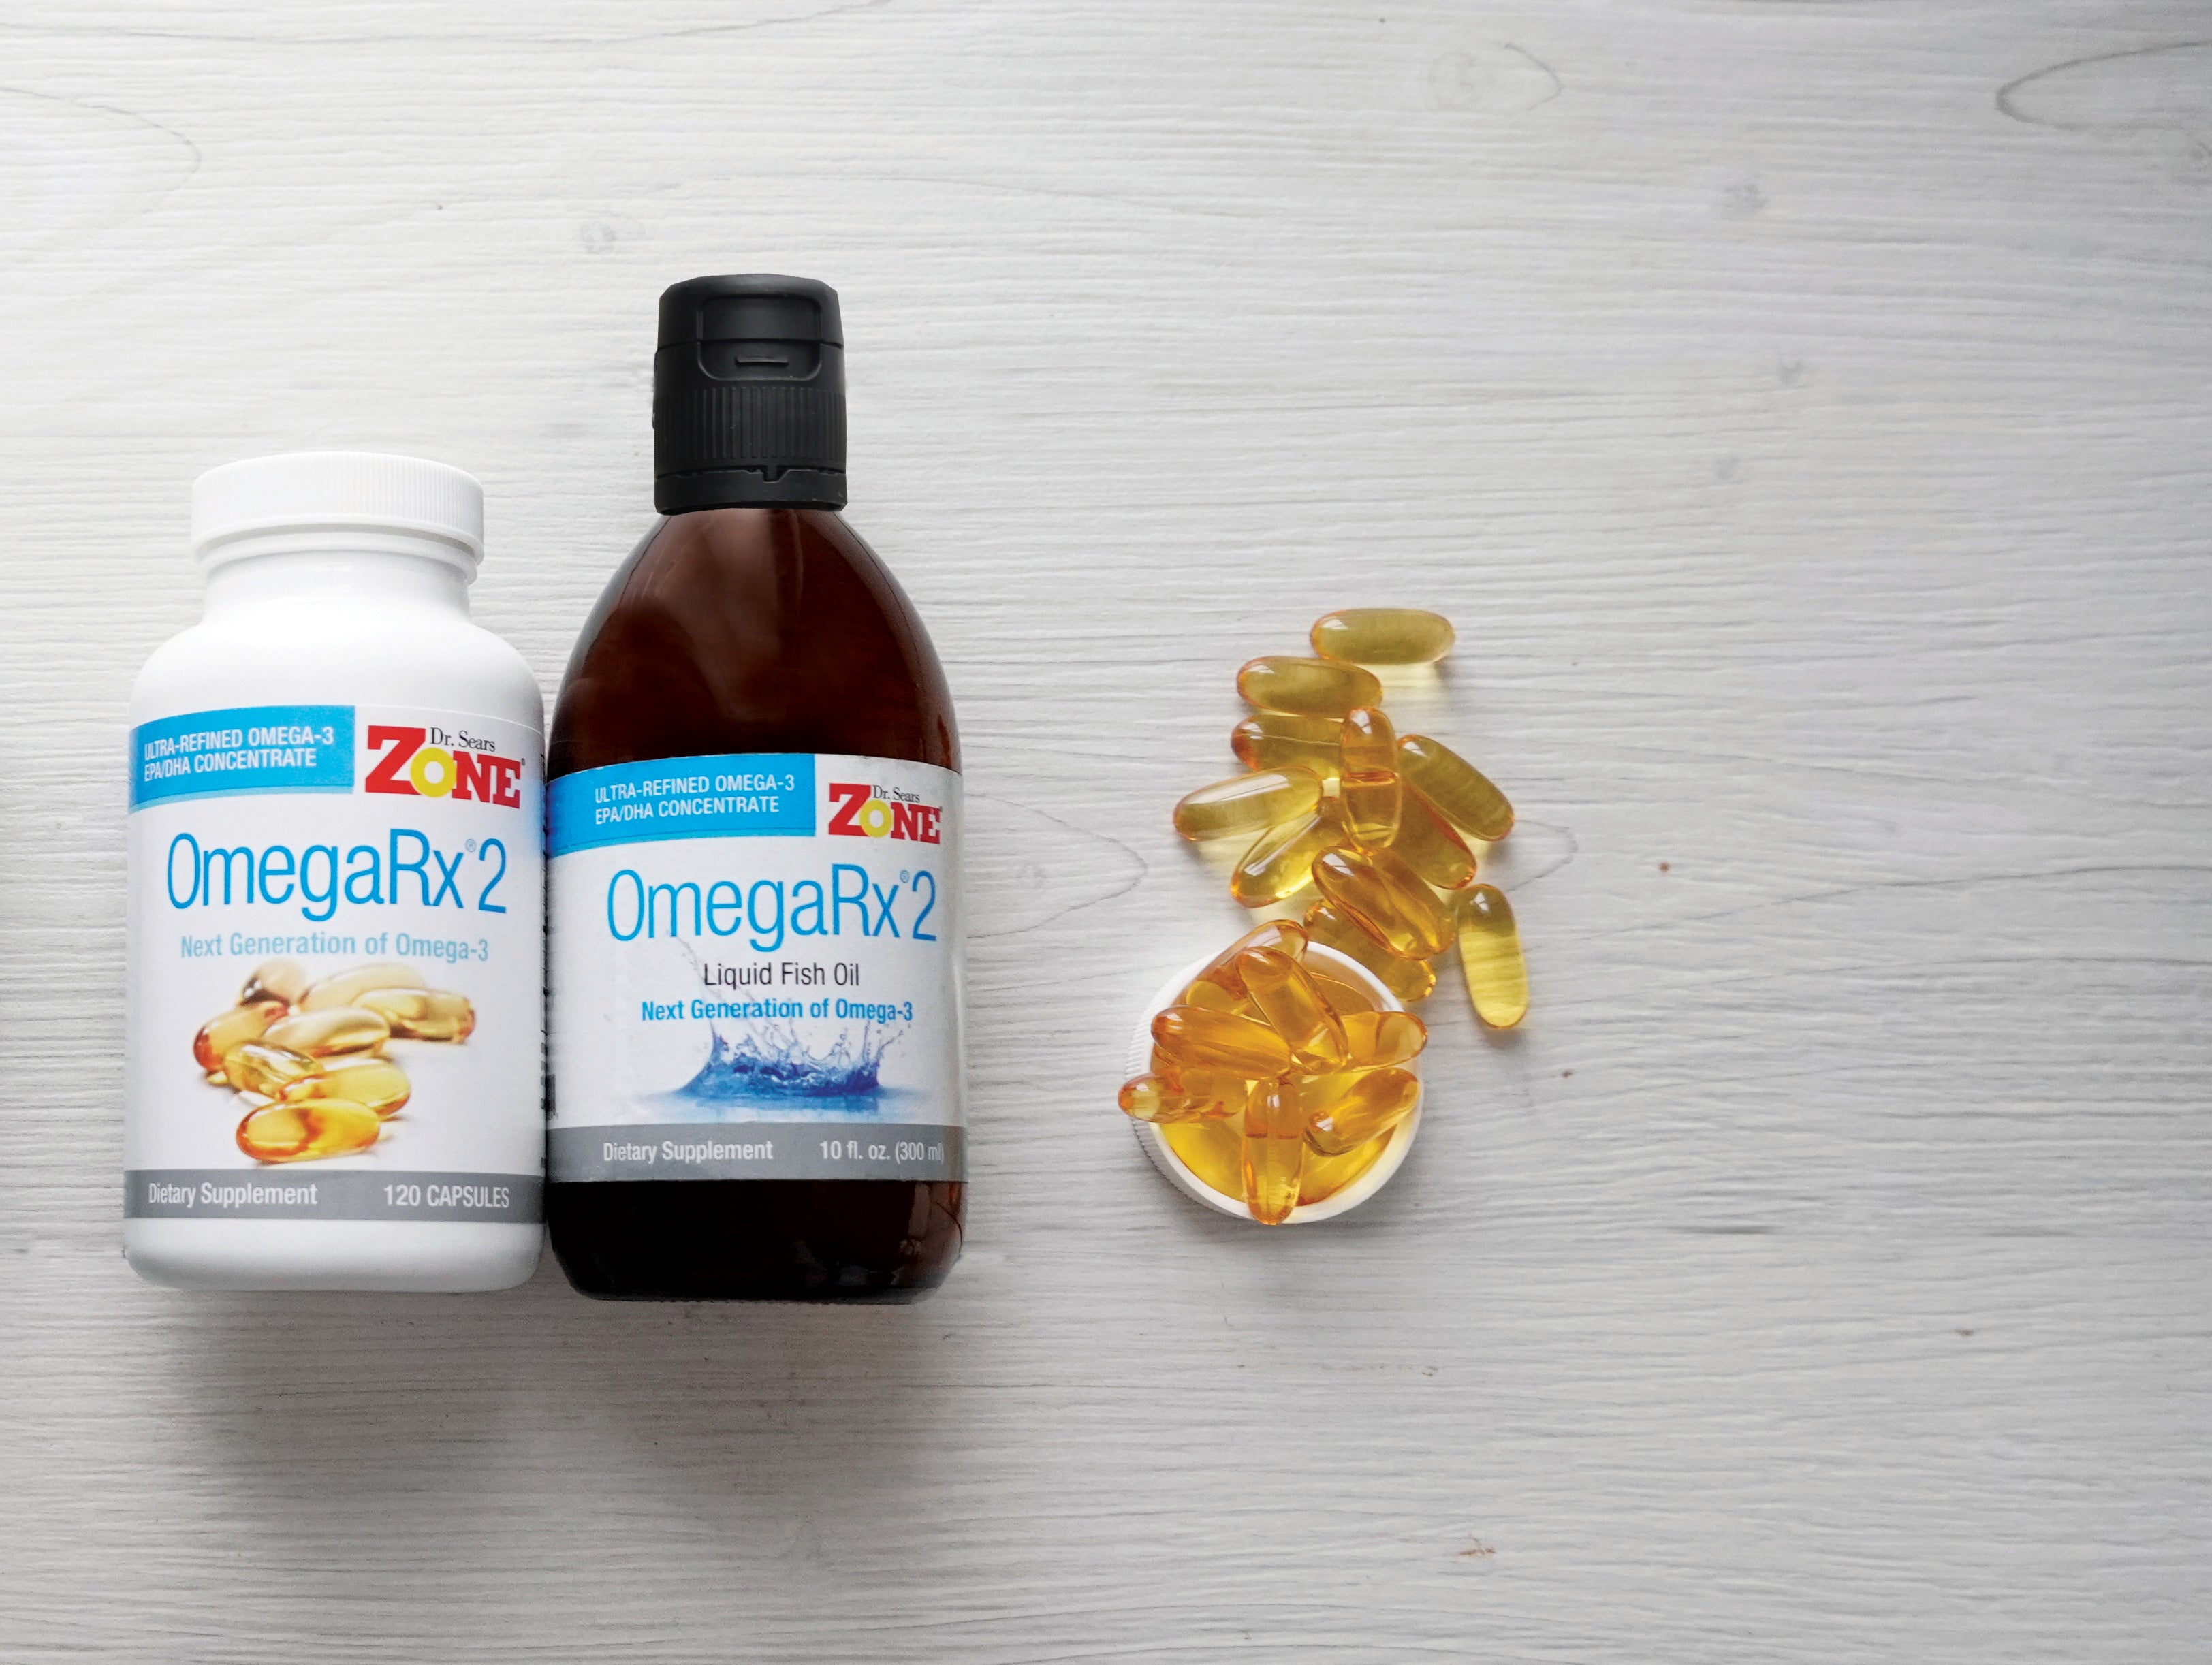 2. Recover Faster with Omega-3 Fish Oil